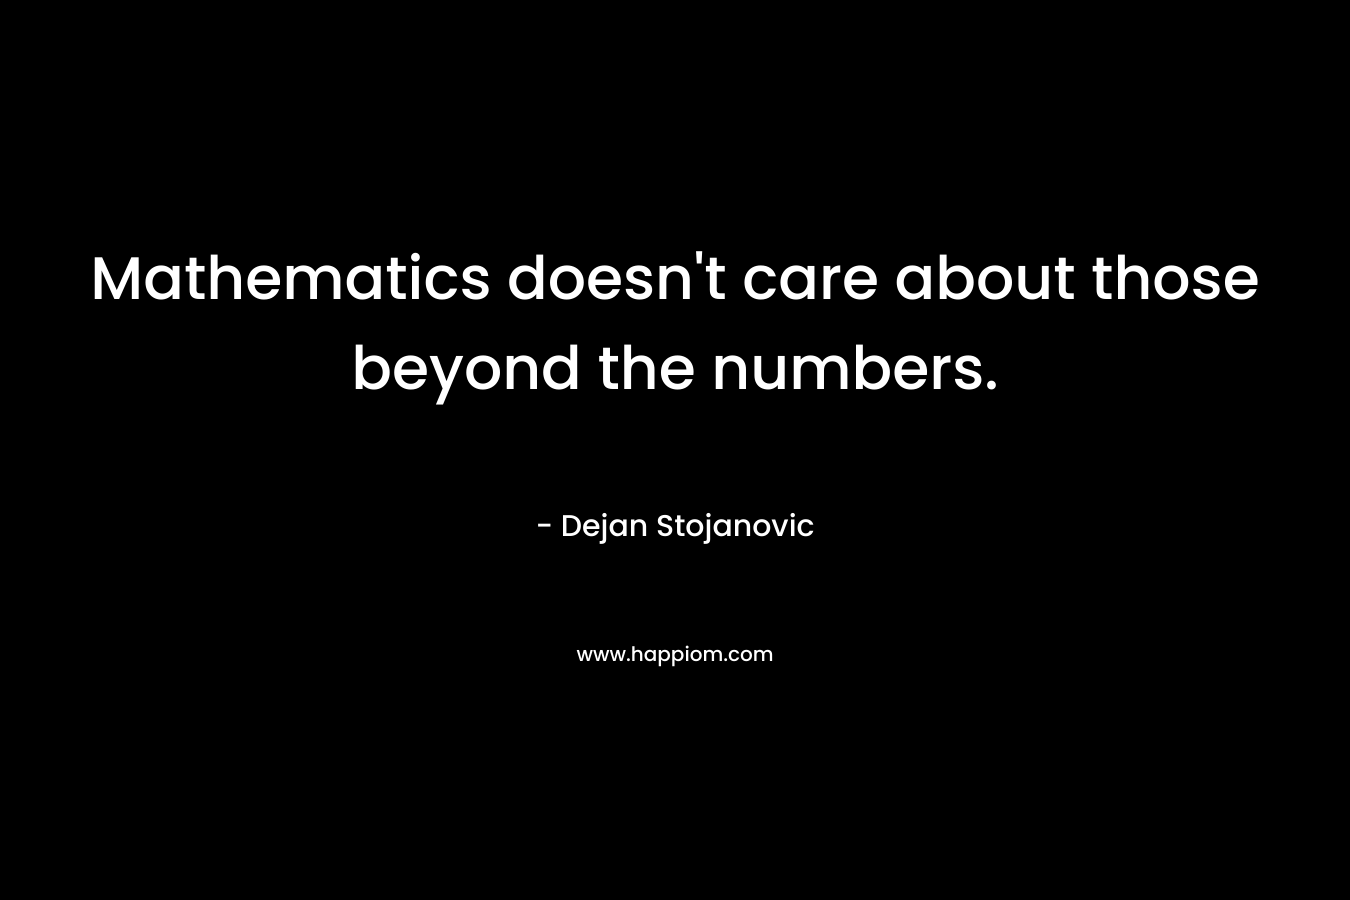 Mathematics doesn't care about those beyond the numbers.